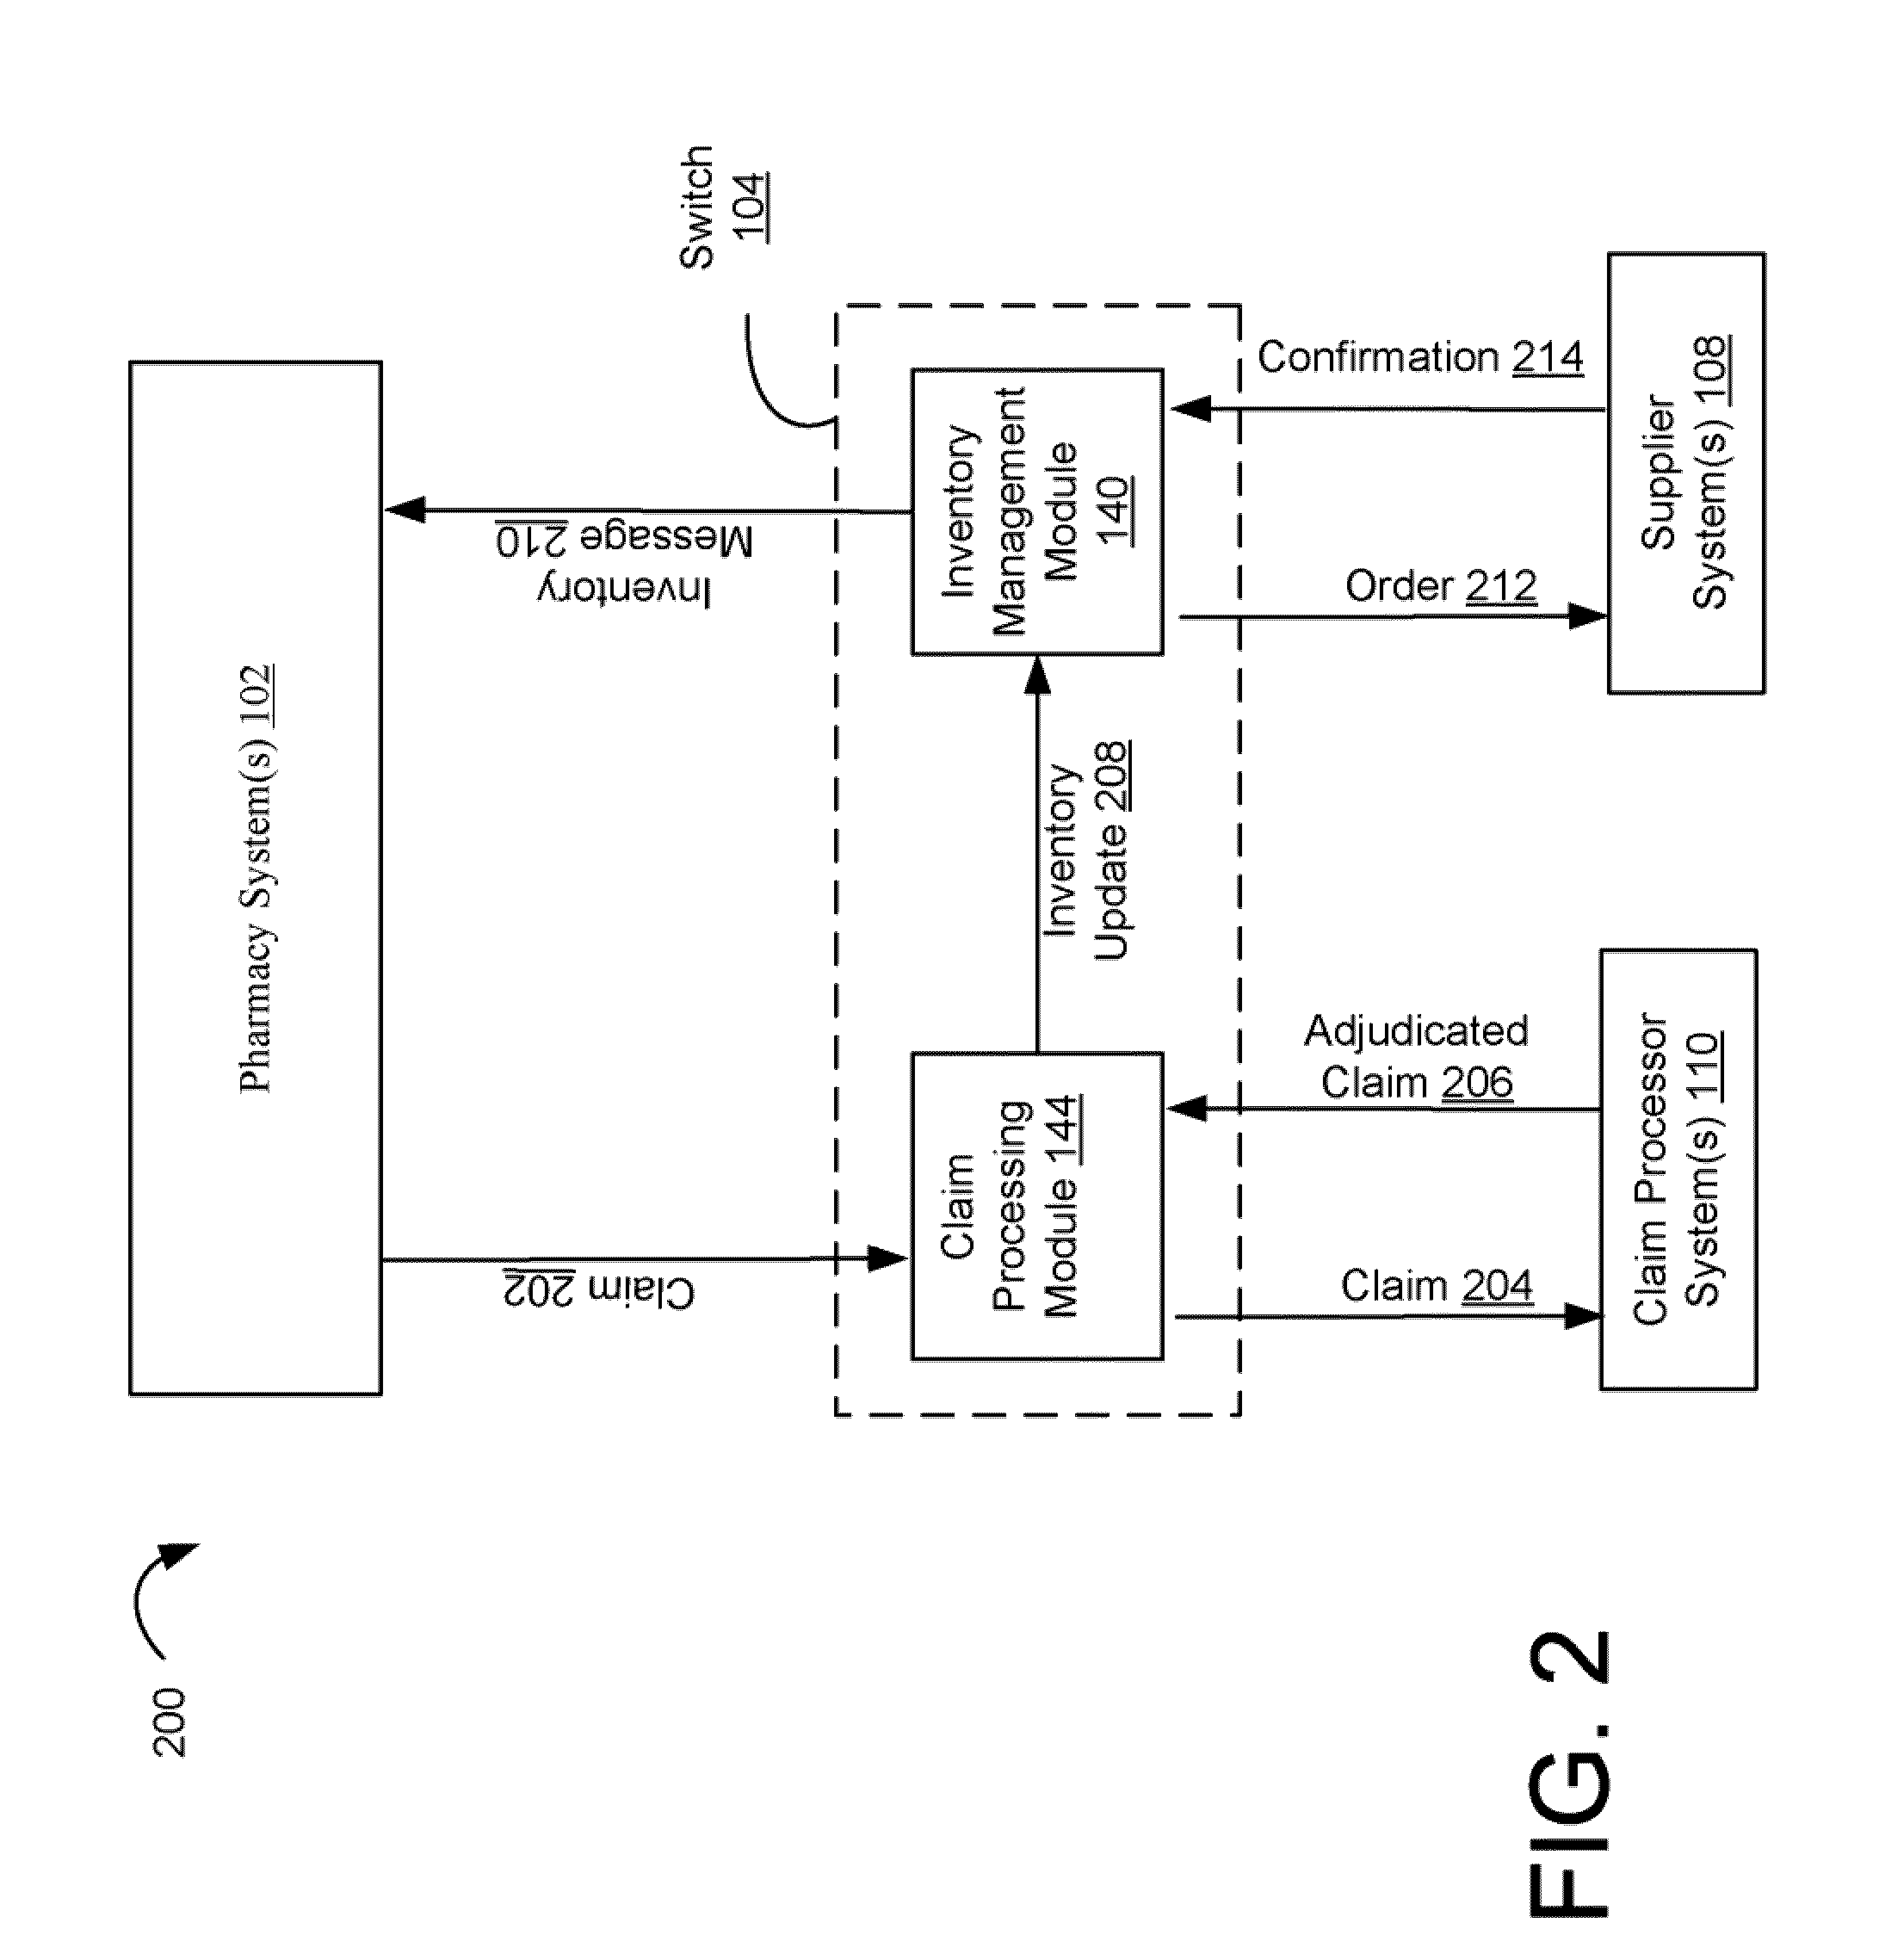 Systems and methods for pharmacy inventory management